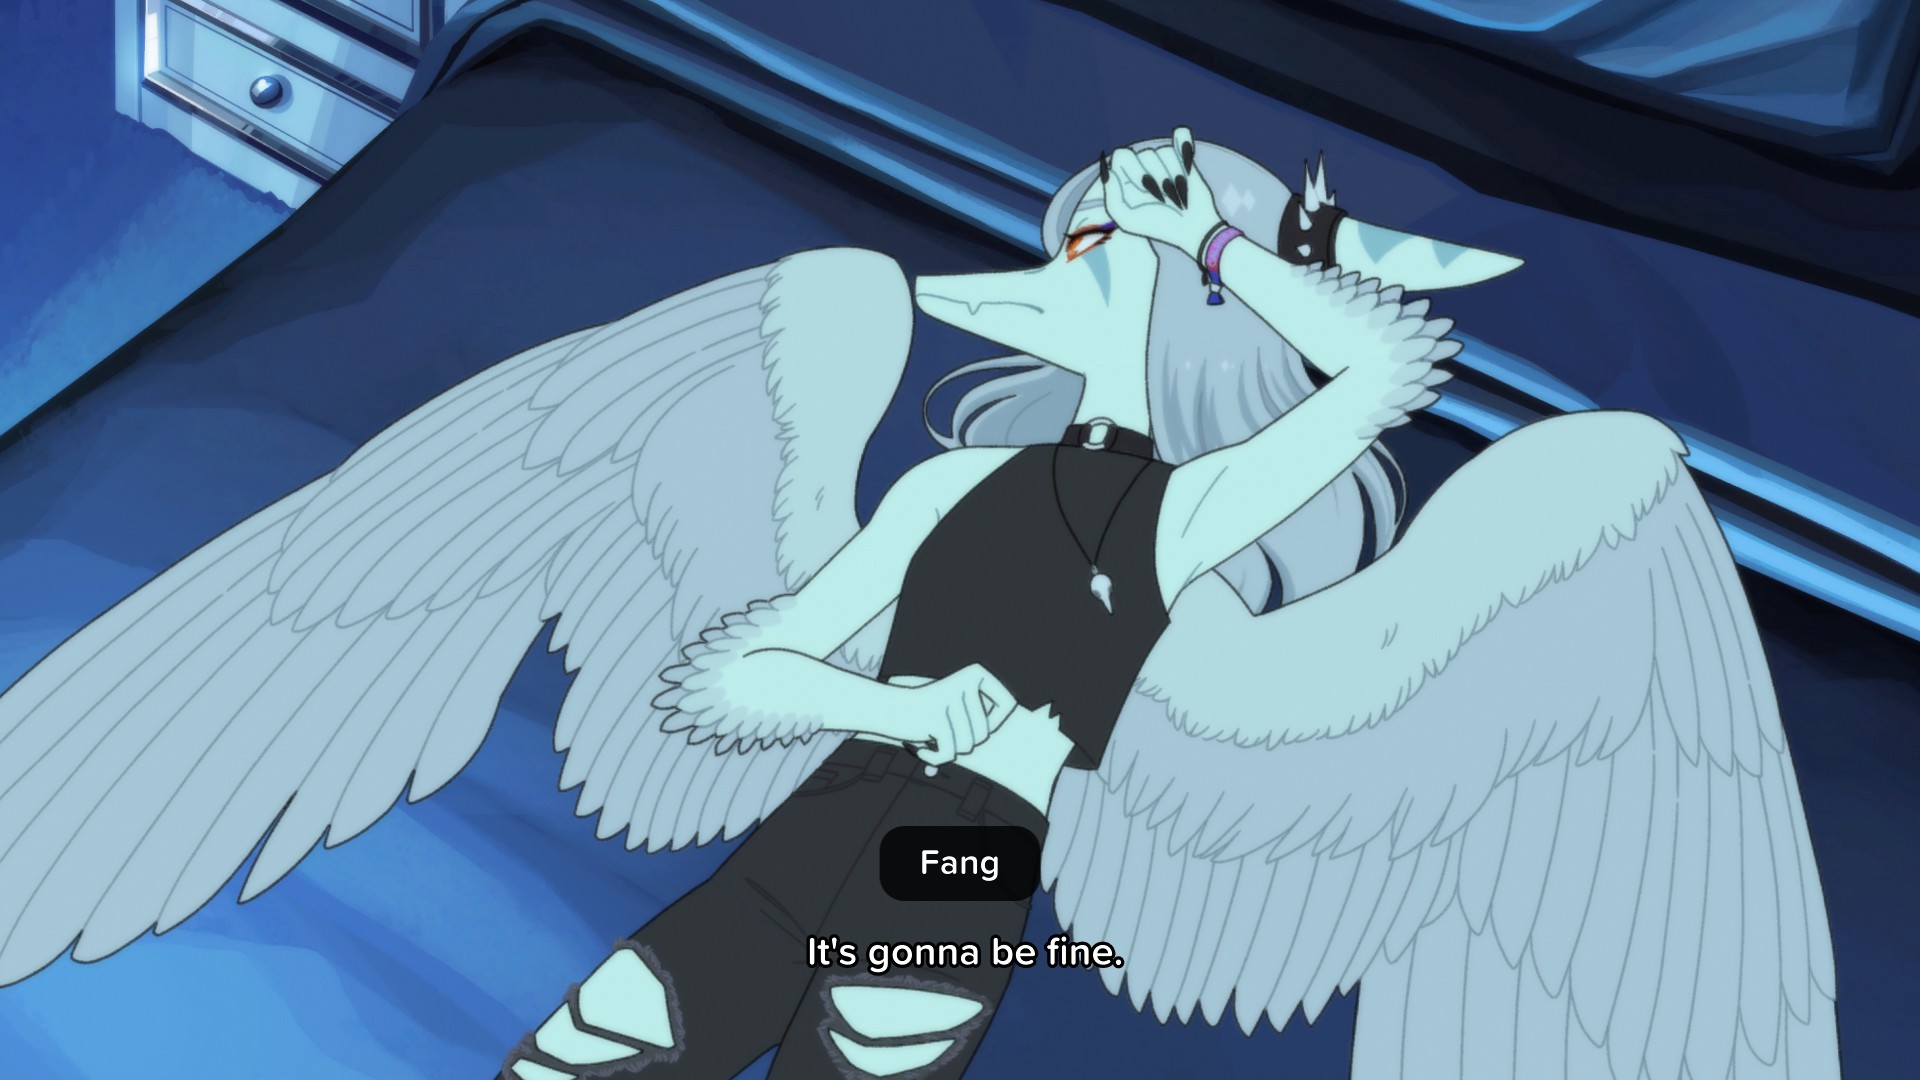 Fang lying in bed, saying to herself that it is going to be fine